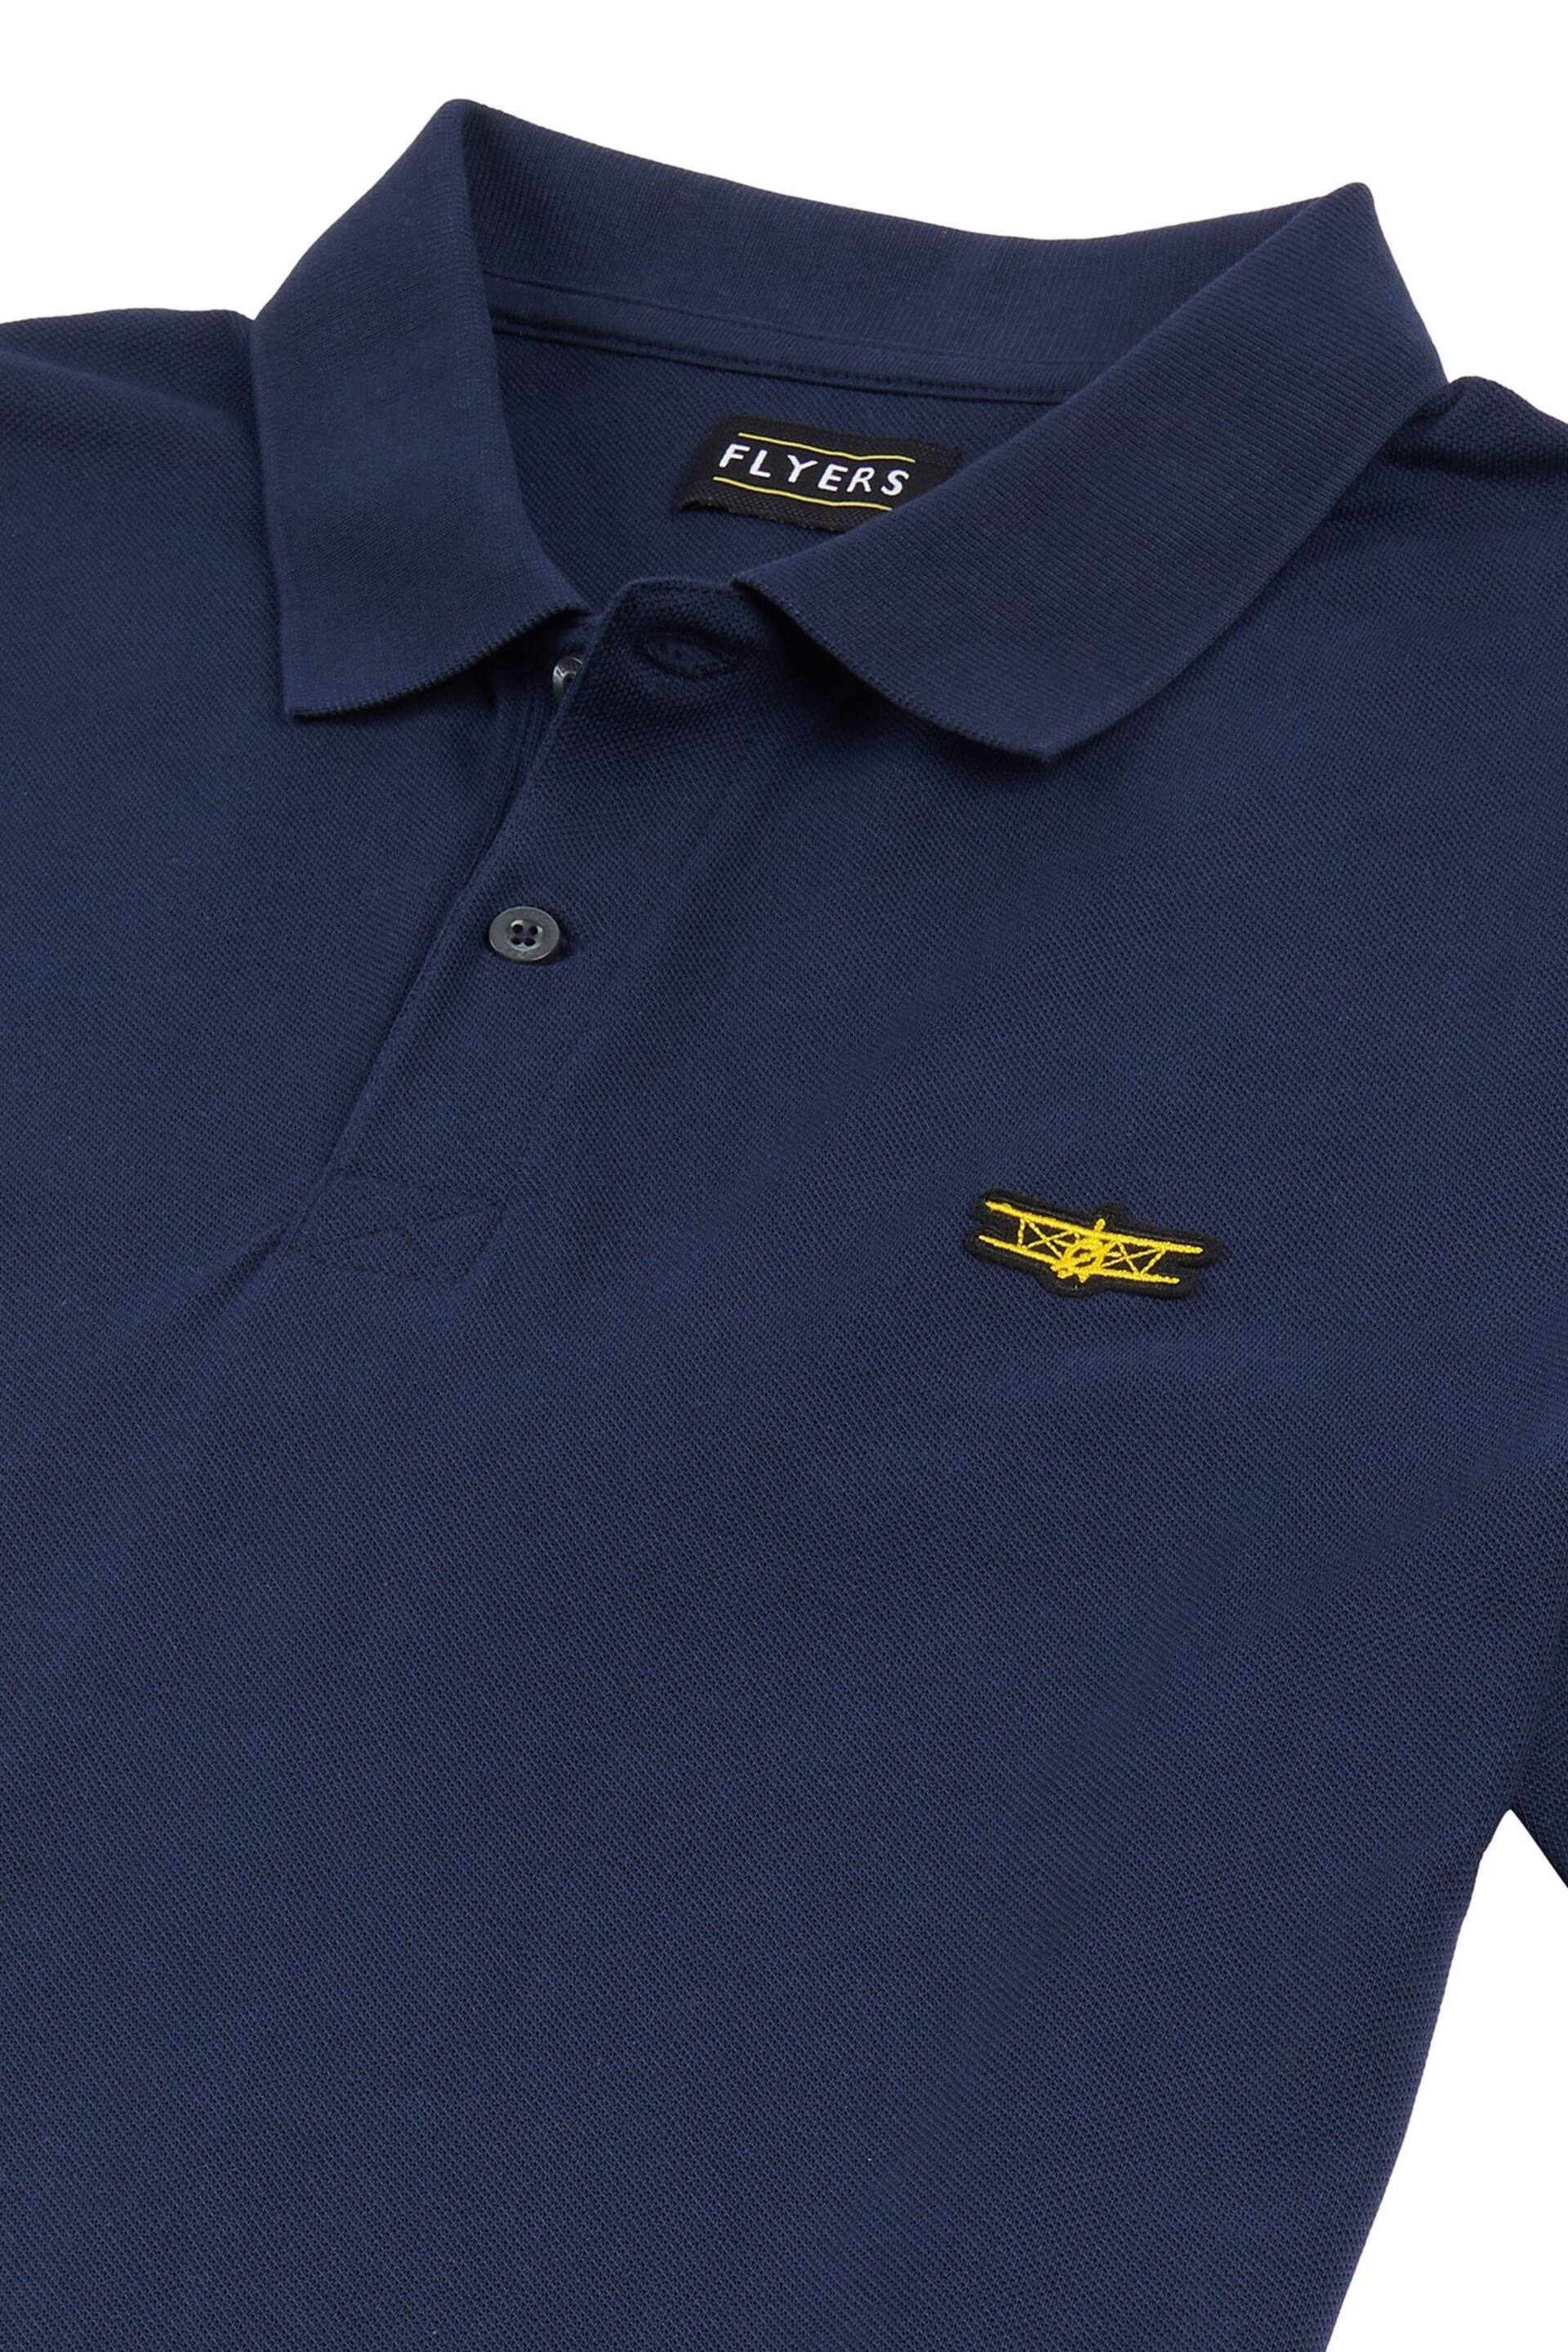 Flyers Mens Classic Fit Polo Shirt - Image 8 of 8